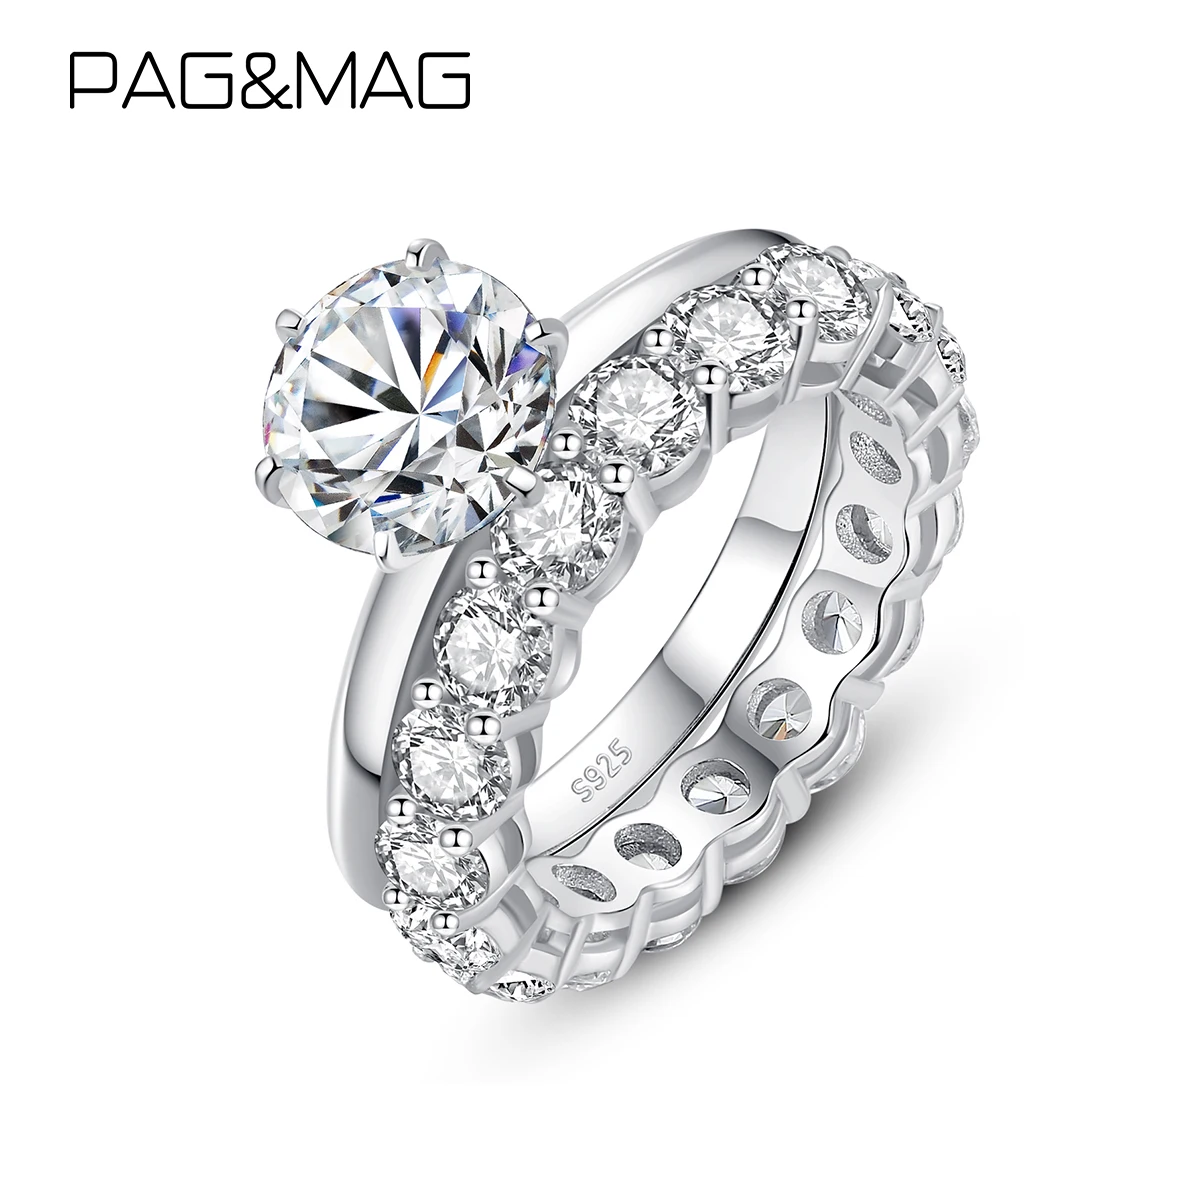 PAG&MAG 1.2ct Moissanite Prongs Double Rings 925 Sterling Silver Rings For Women Statement Wedding Band Jewelry anniversary